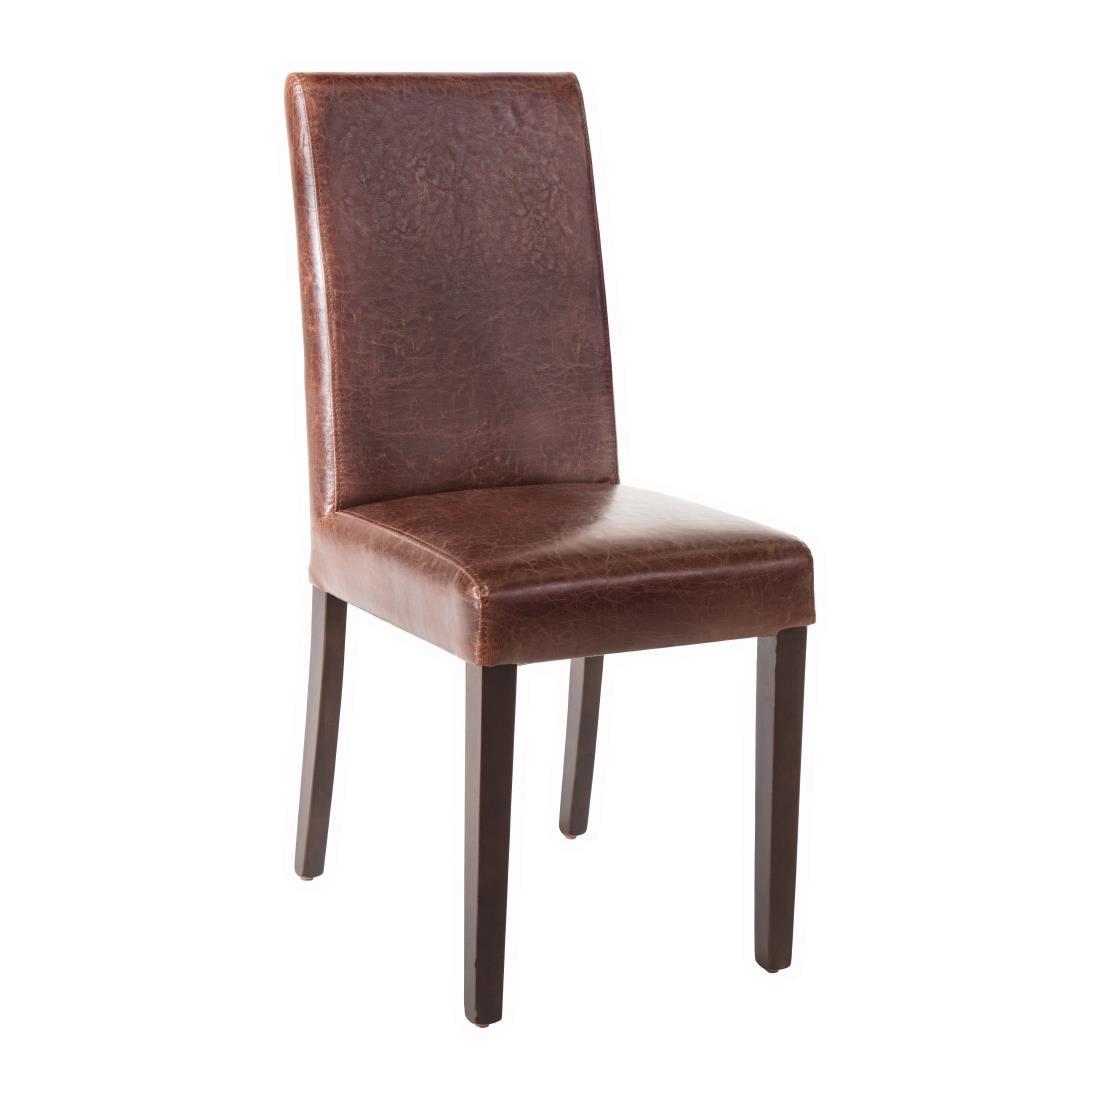 Bolero Faux Leather Dining Chair Antique Brown (Pack of 2) - GR369  - 1